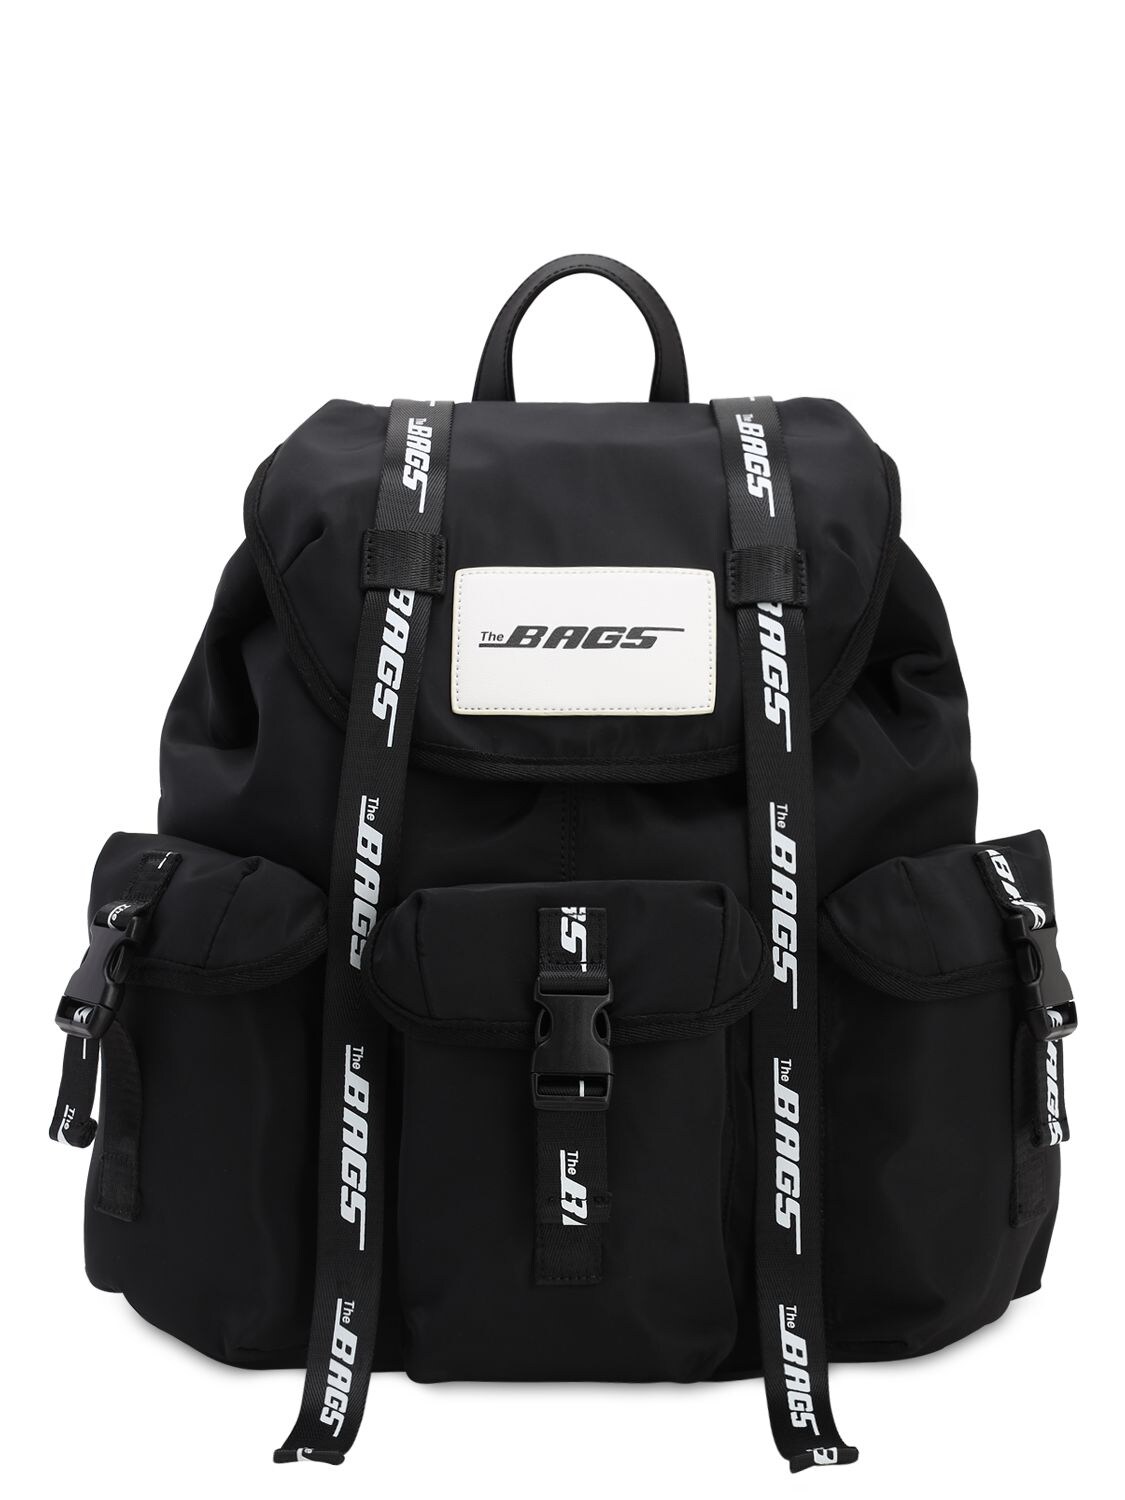 The Bags Nylon Backpack In Black